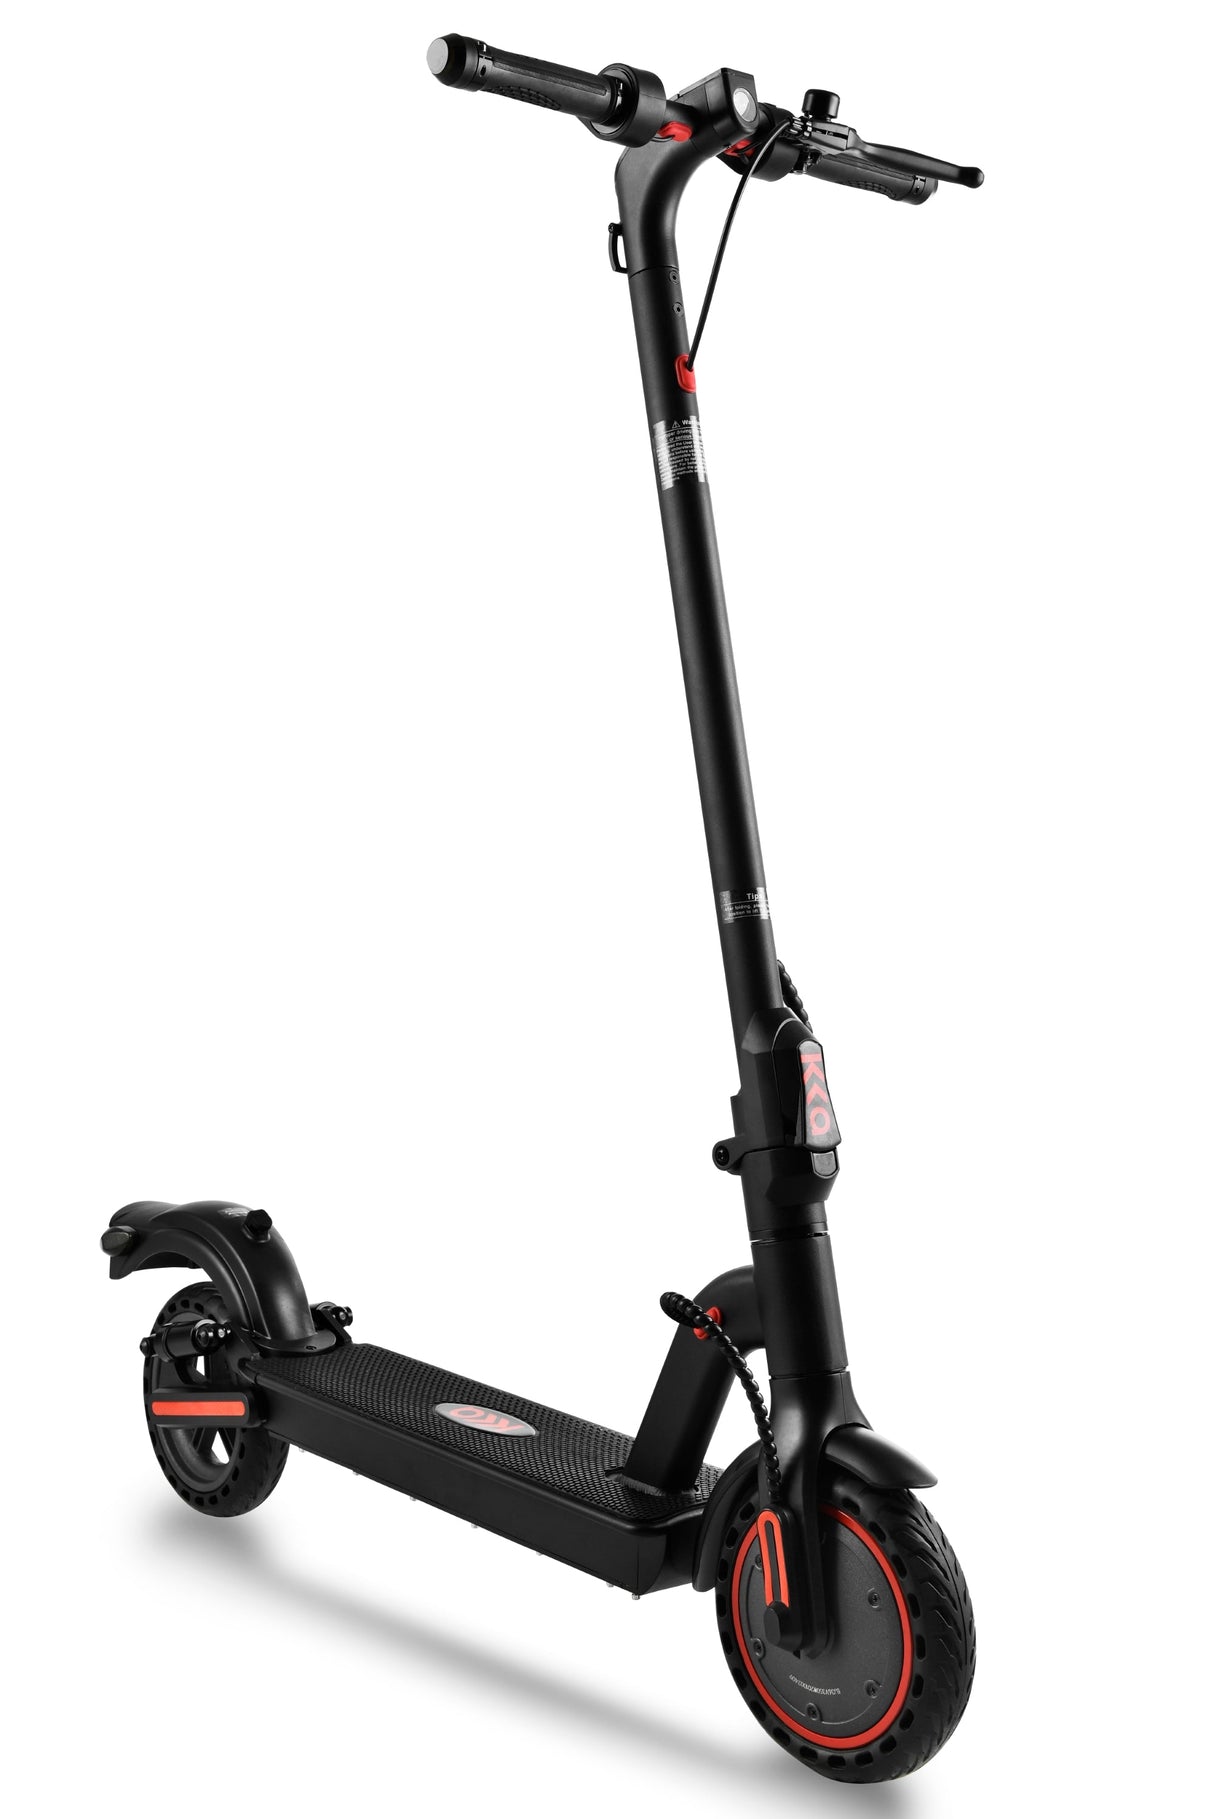 36V Freddo L2 E-Scooter 350W motor, shock absorbers, dual braking system and App, turn signal light and brake lights - DTI Direct USA